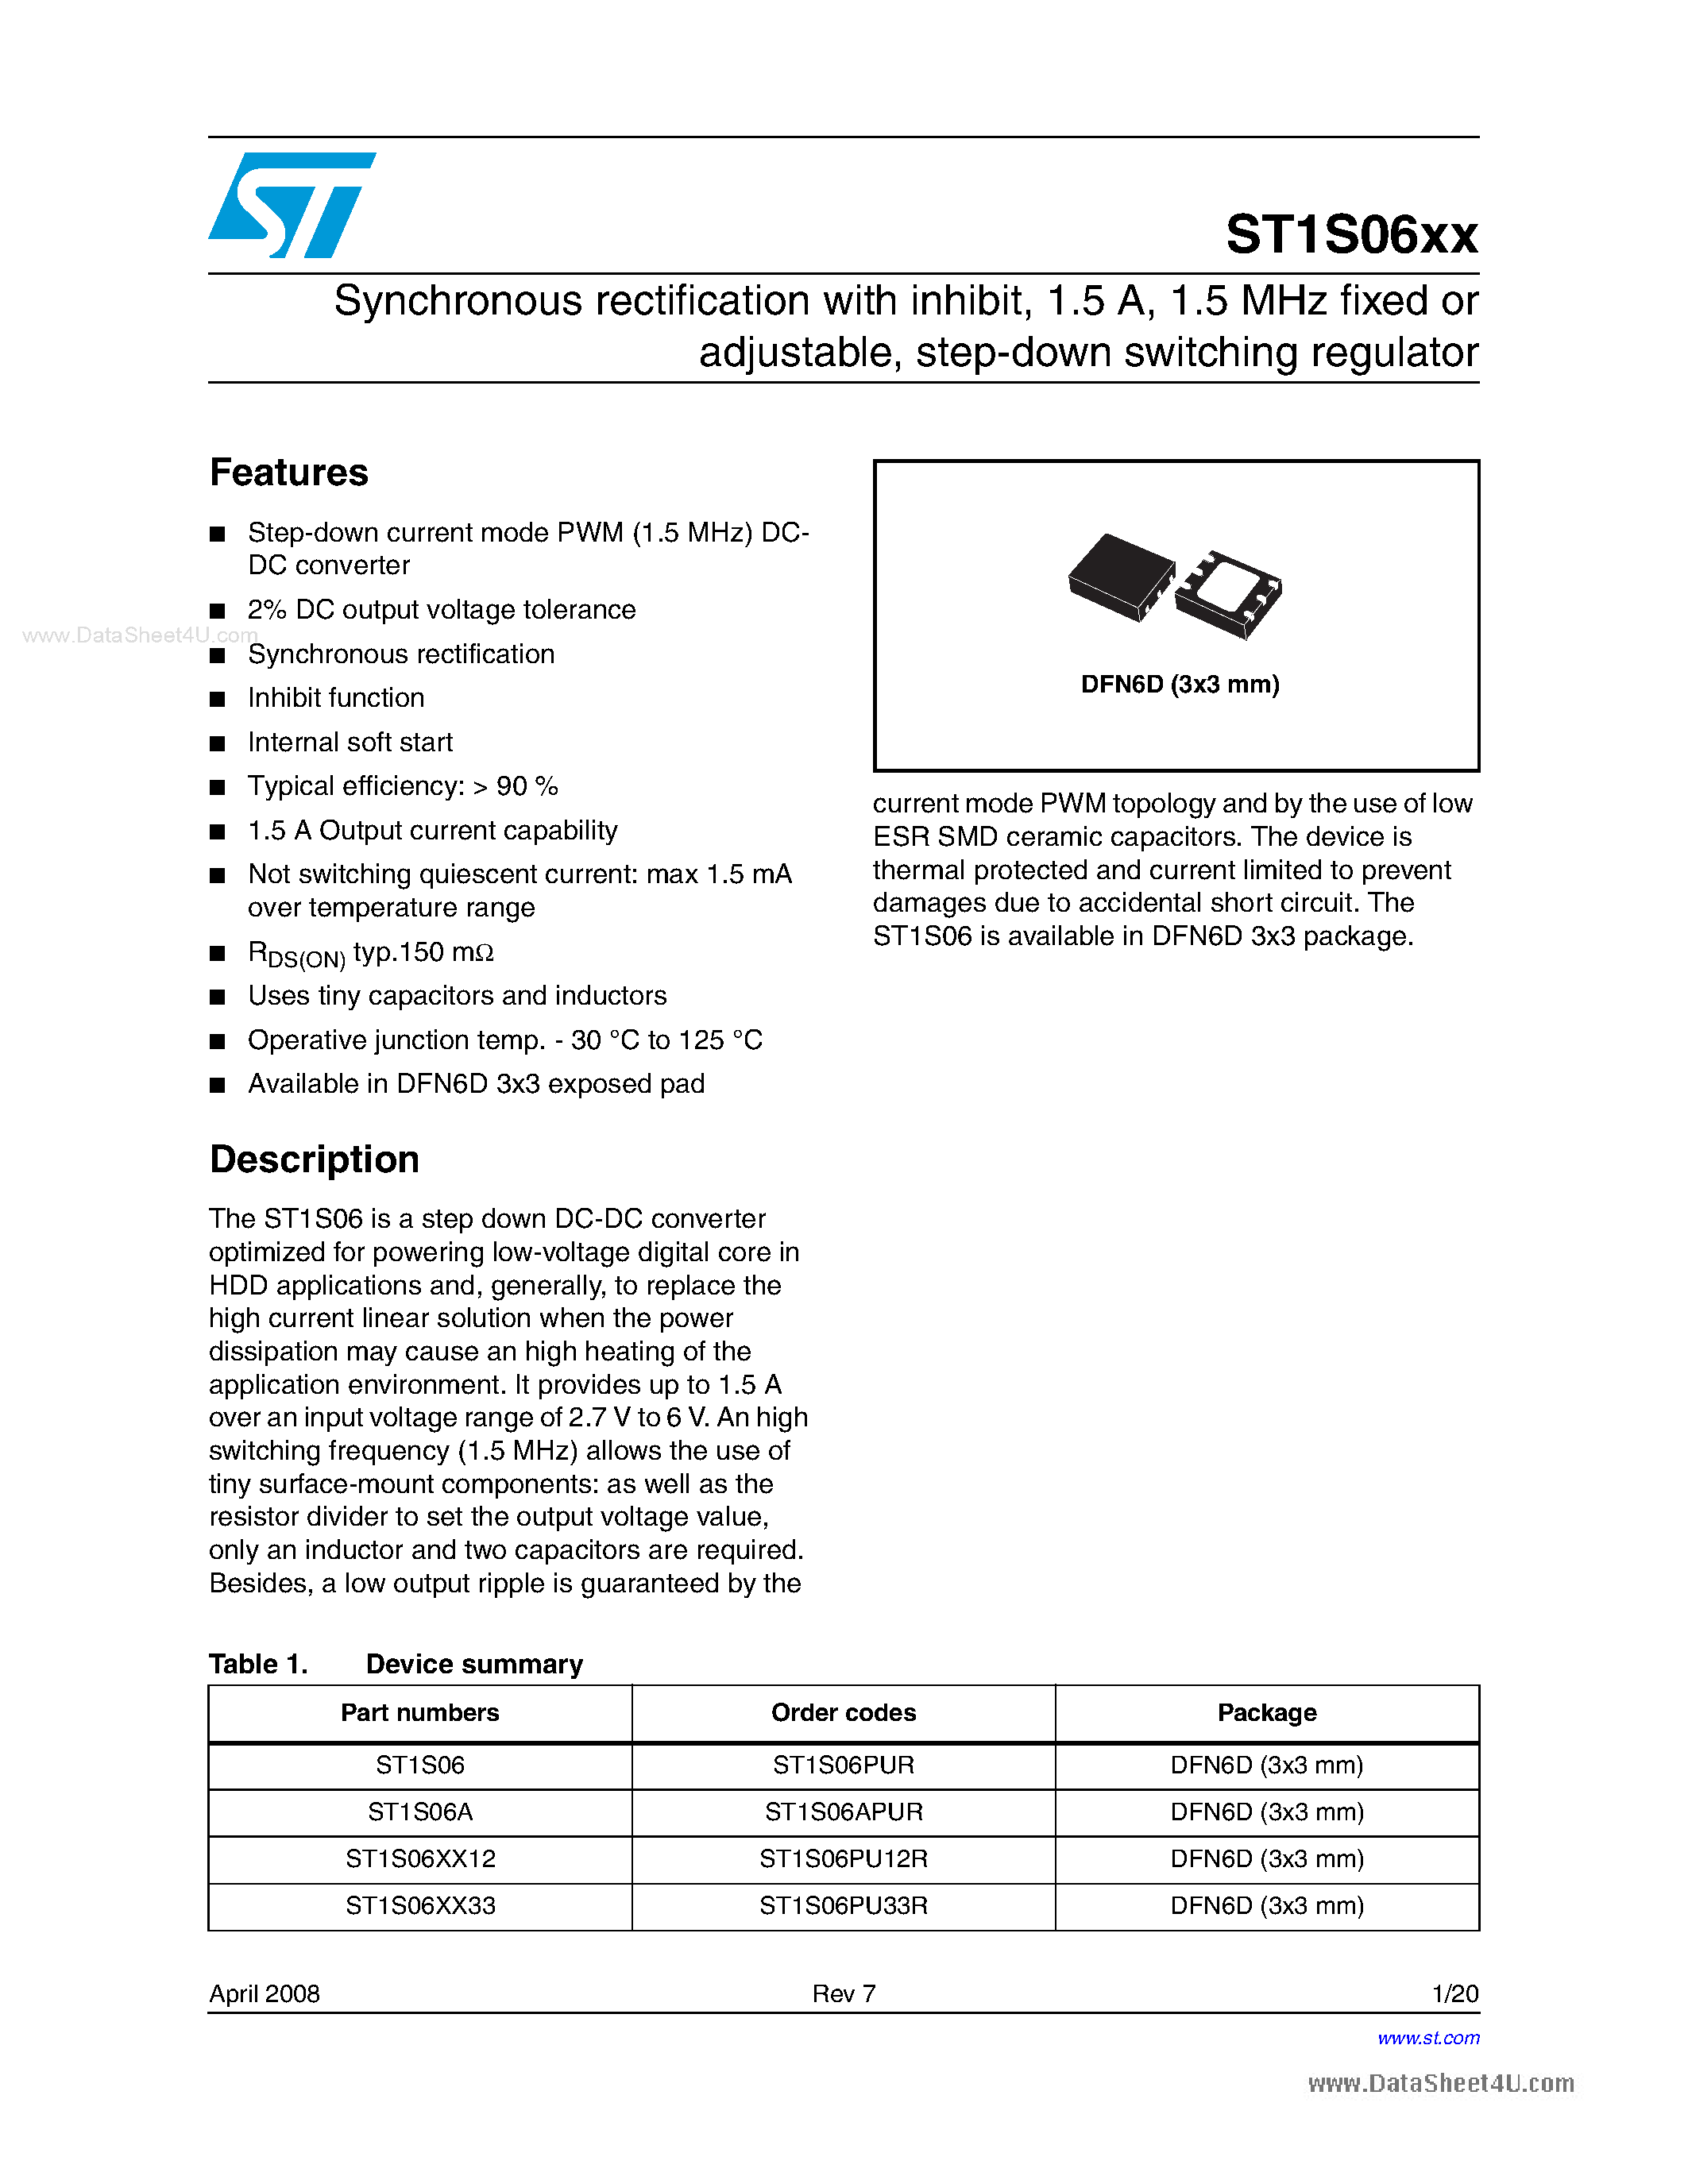 Datasheet ST1S06xx - Synchronous rectification page 1